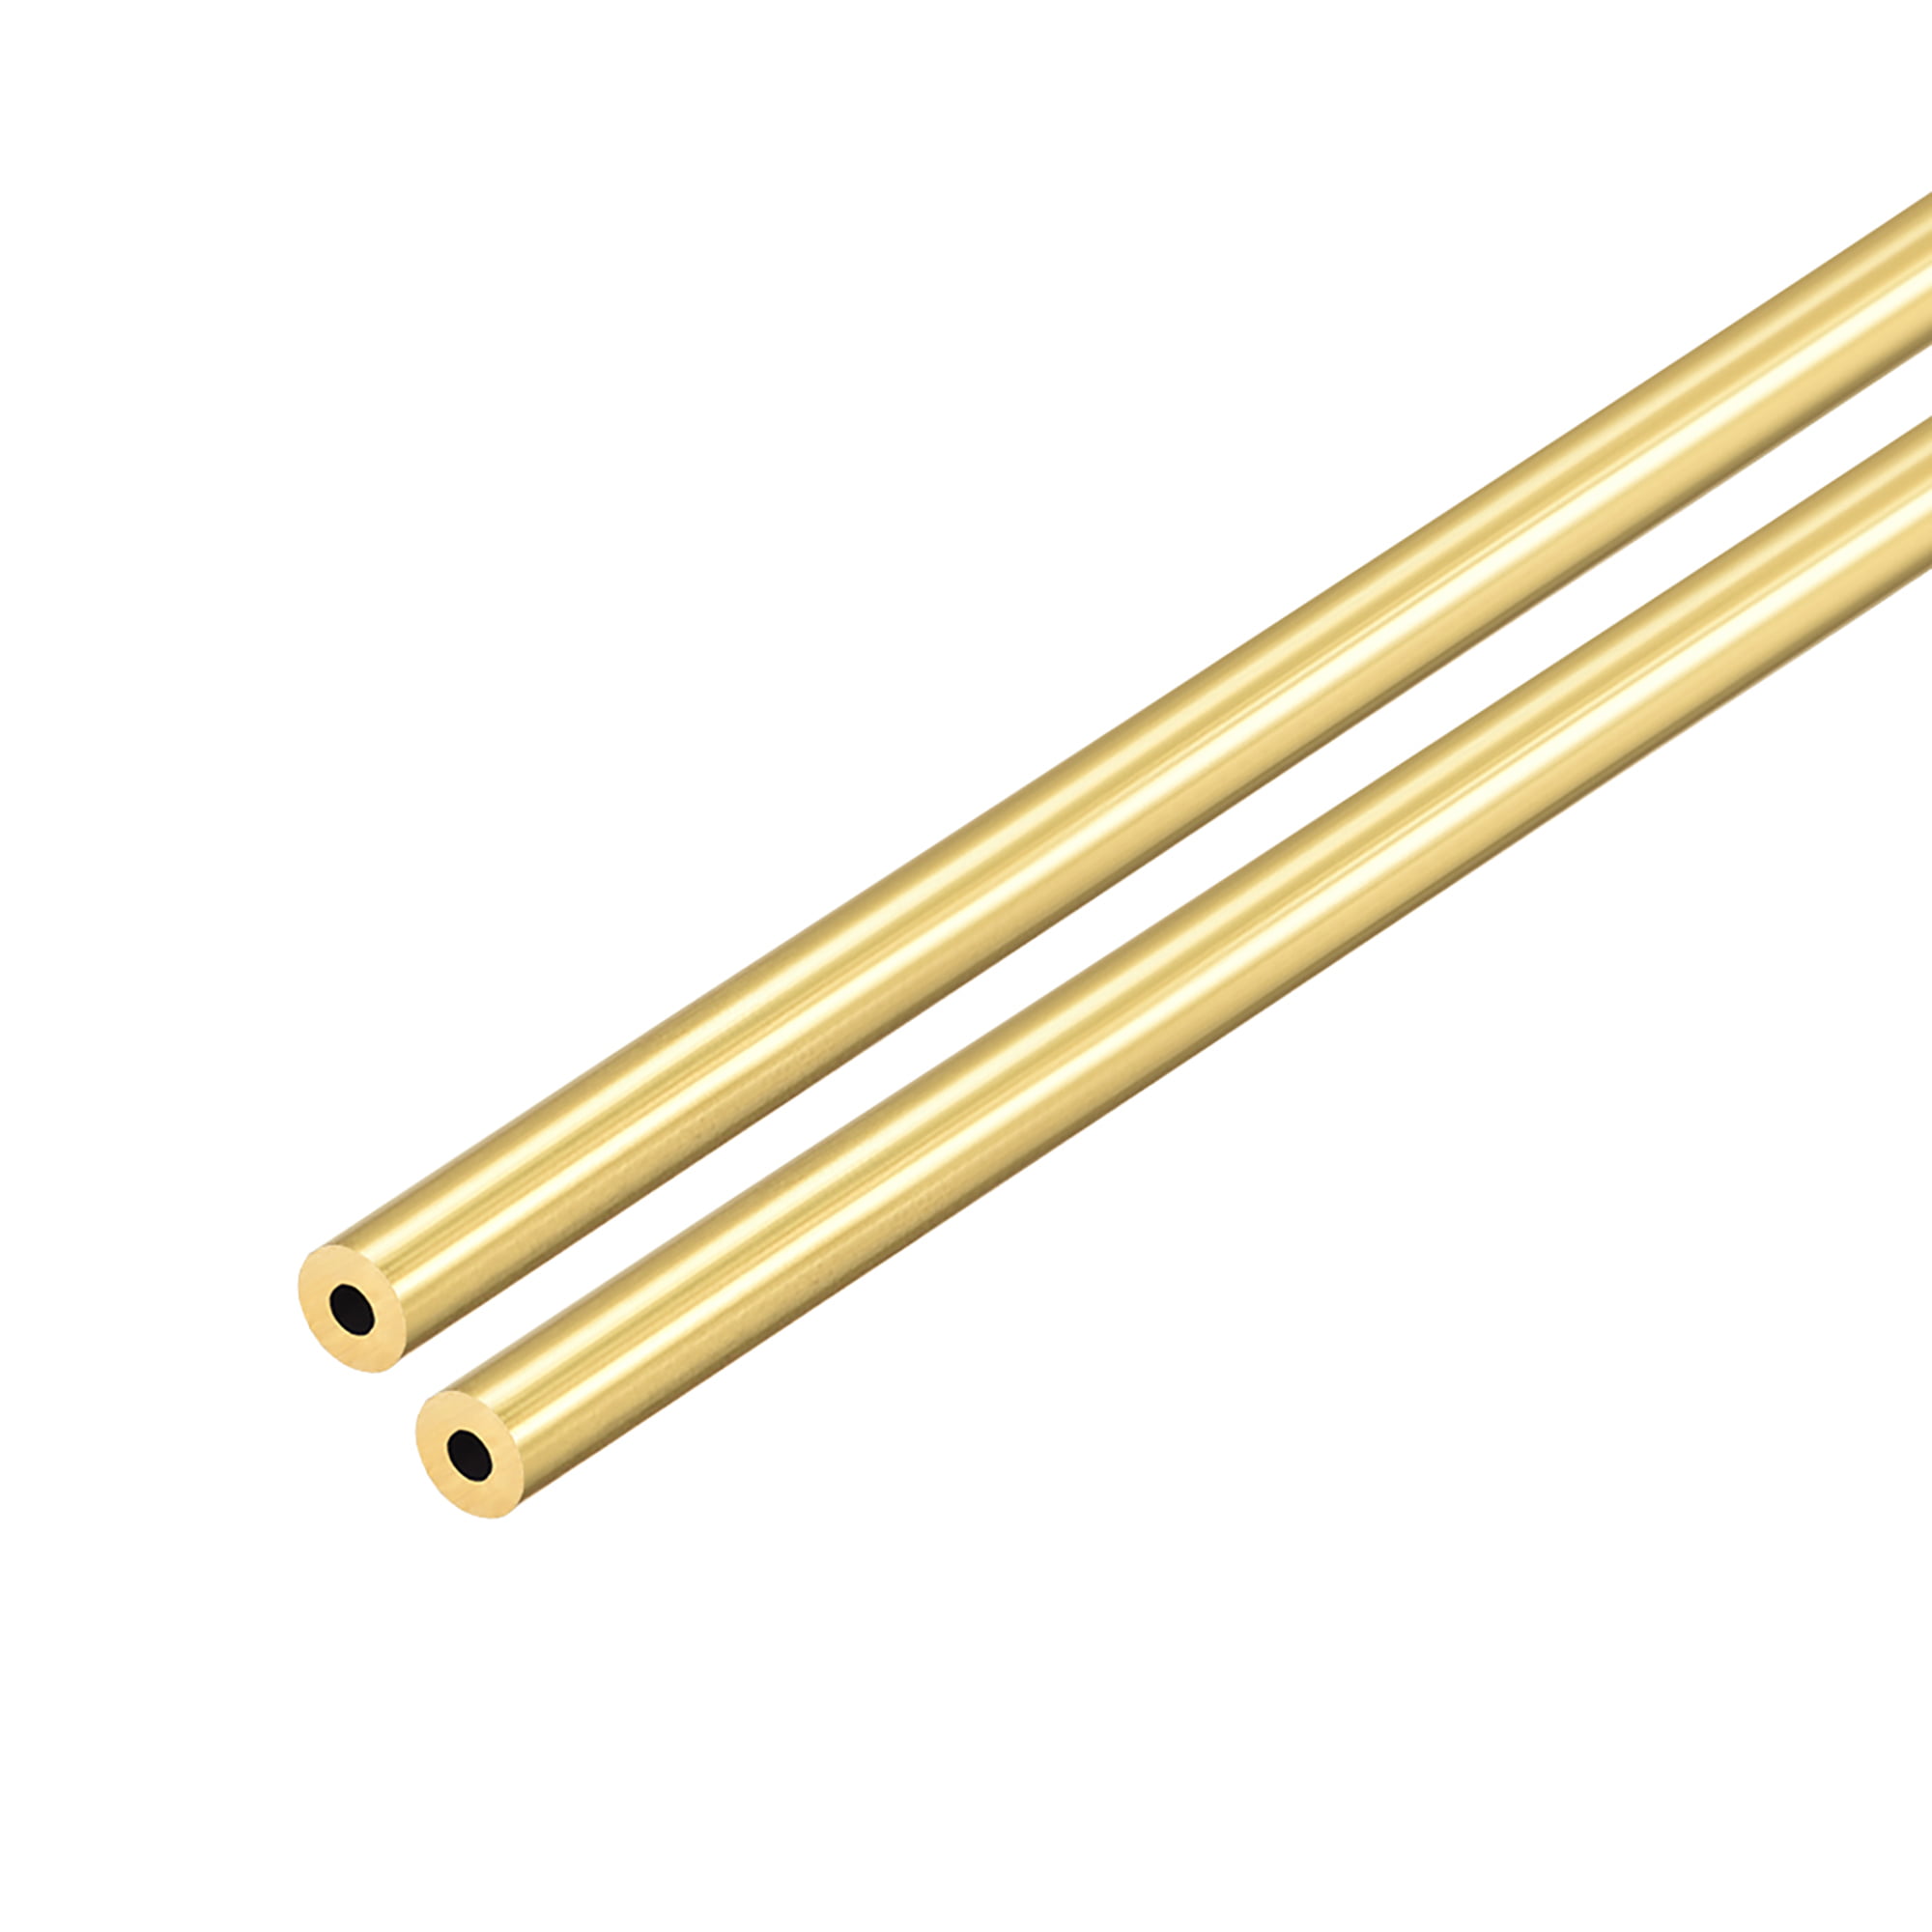 uxcell 5mm x 9mm x 500mm Brass Pipe Tube Round Bar Rod for RC Boat 